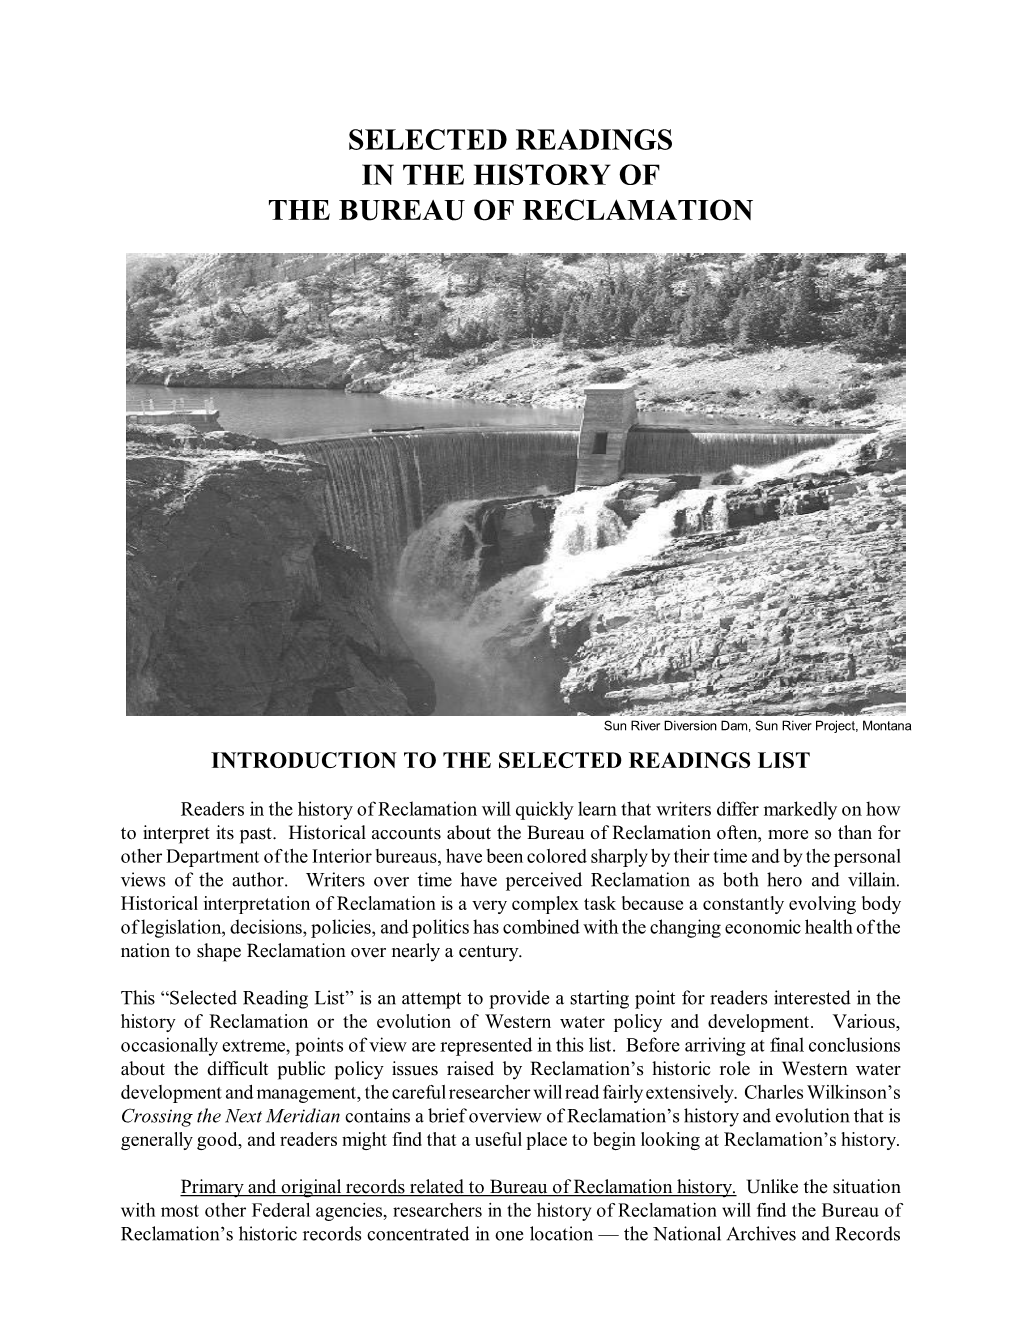 Selected Readings in Reclamation History